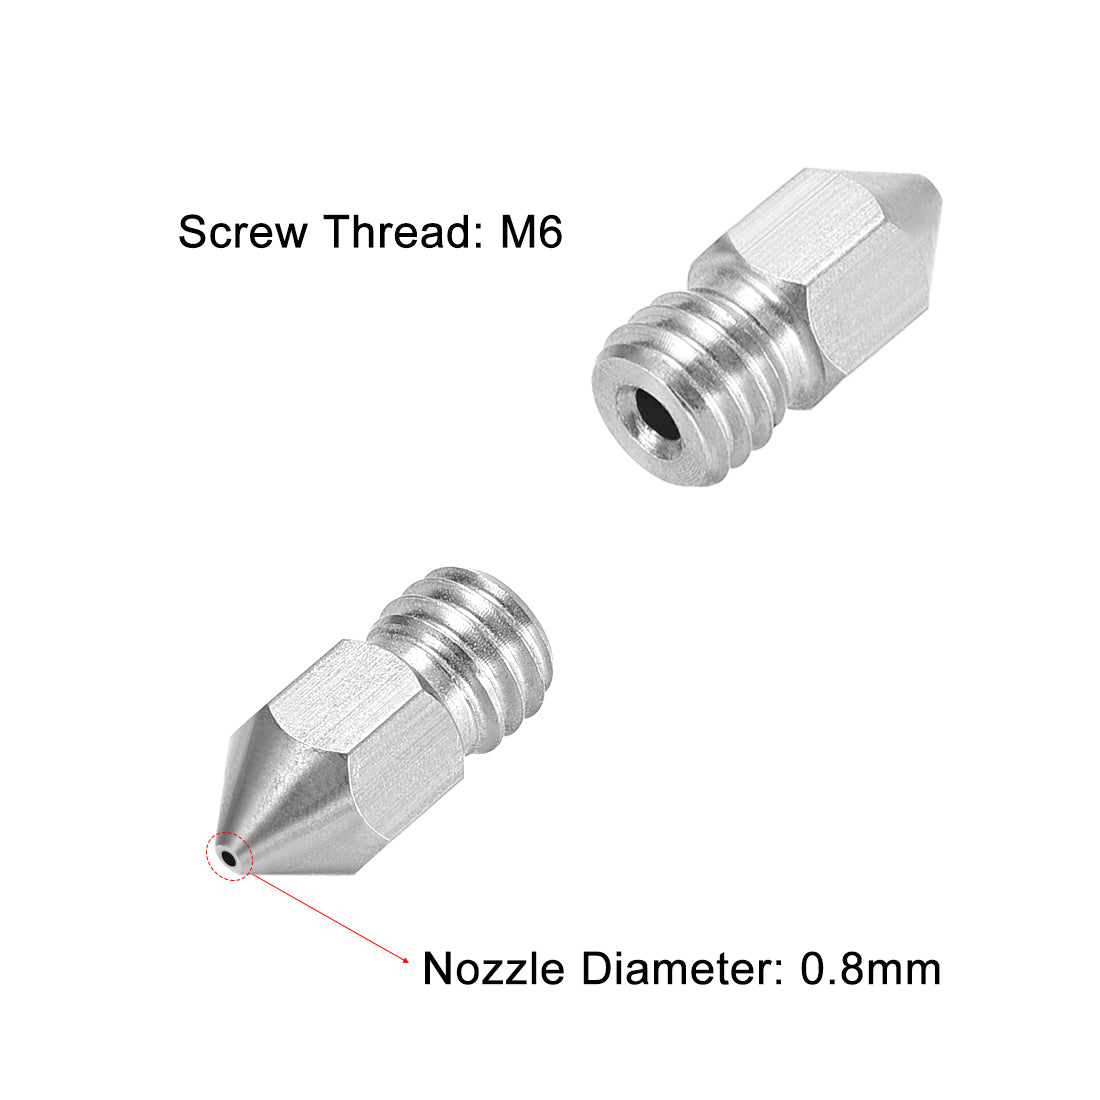 uxcell Uxcell 3D Printer Nozzle,Stainless Steel Nozzle,Extruder Print Head for Filament 3D Printer